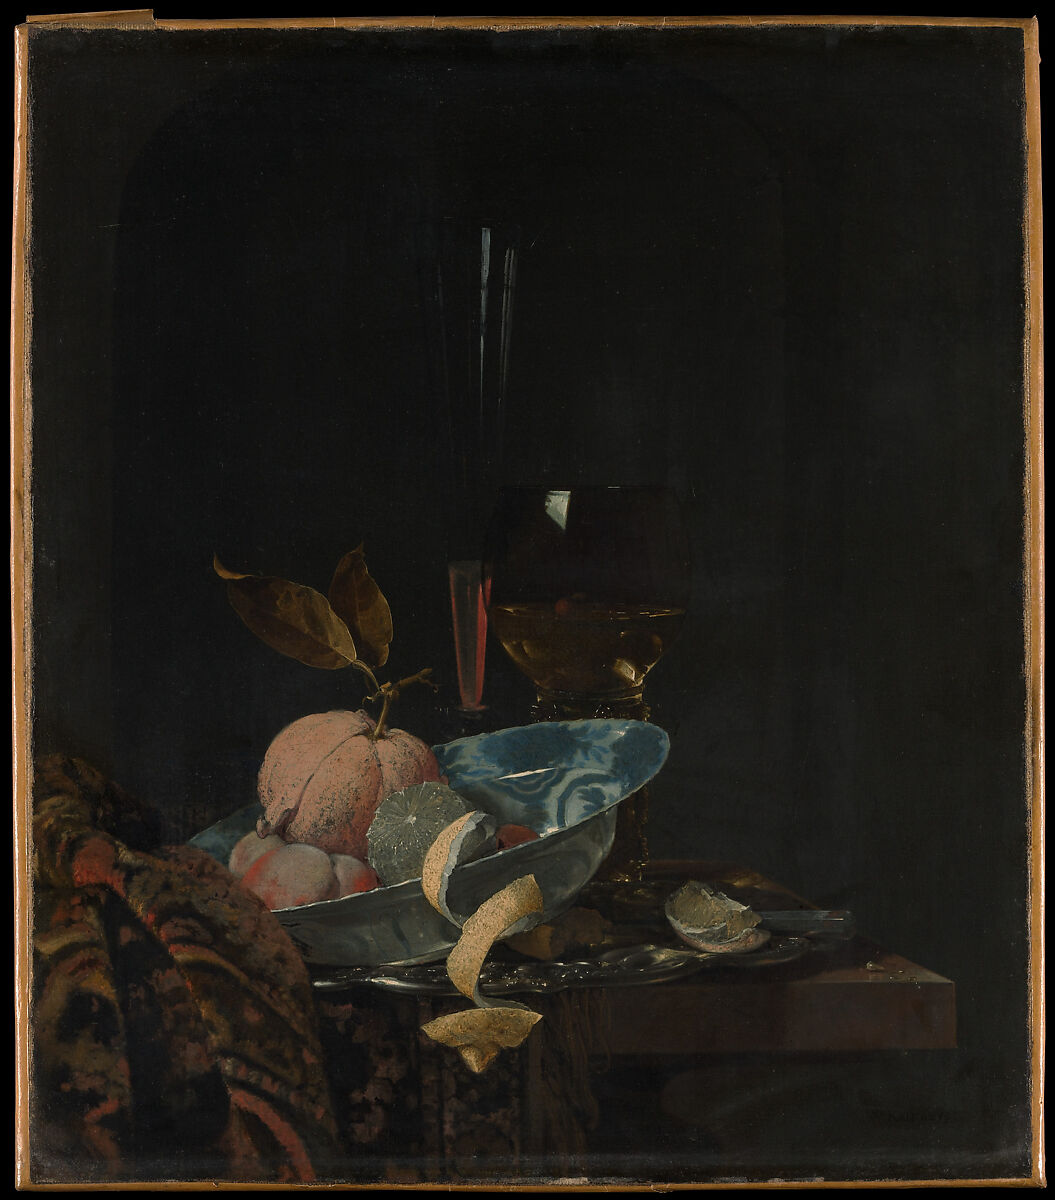 Still Life with Fruit, Glassware, and a Wanli Bowl